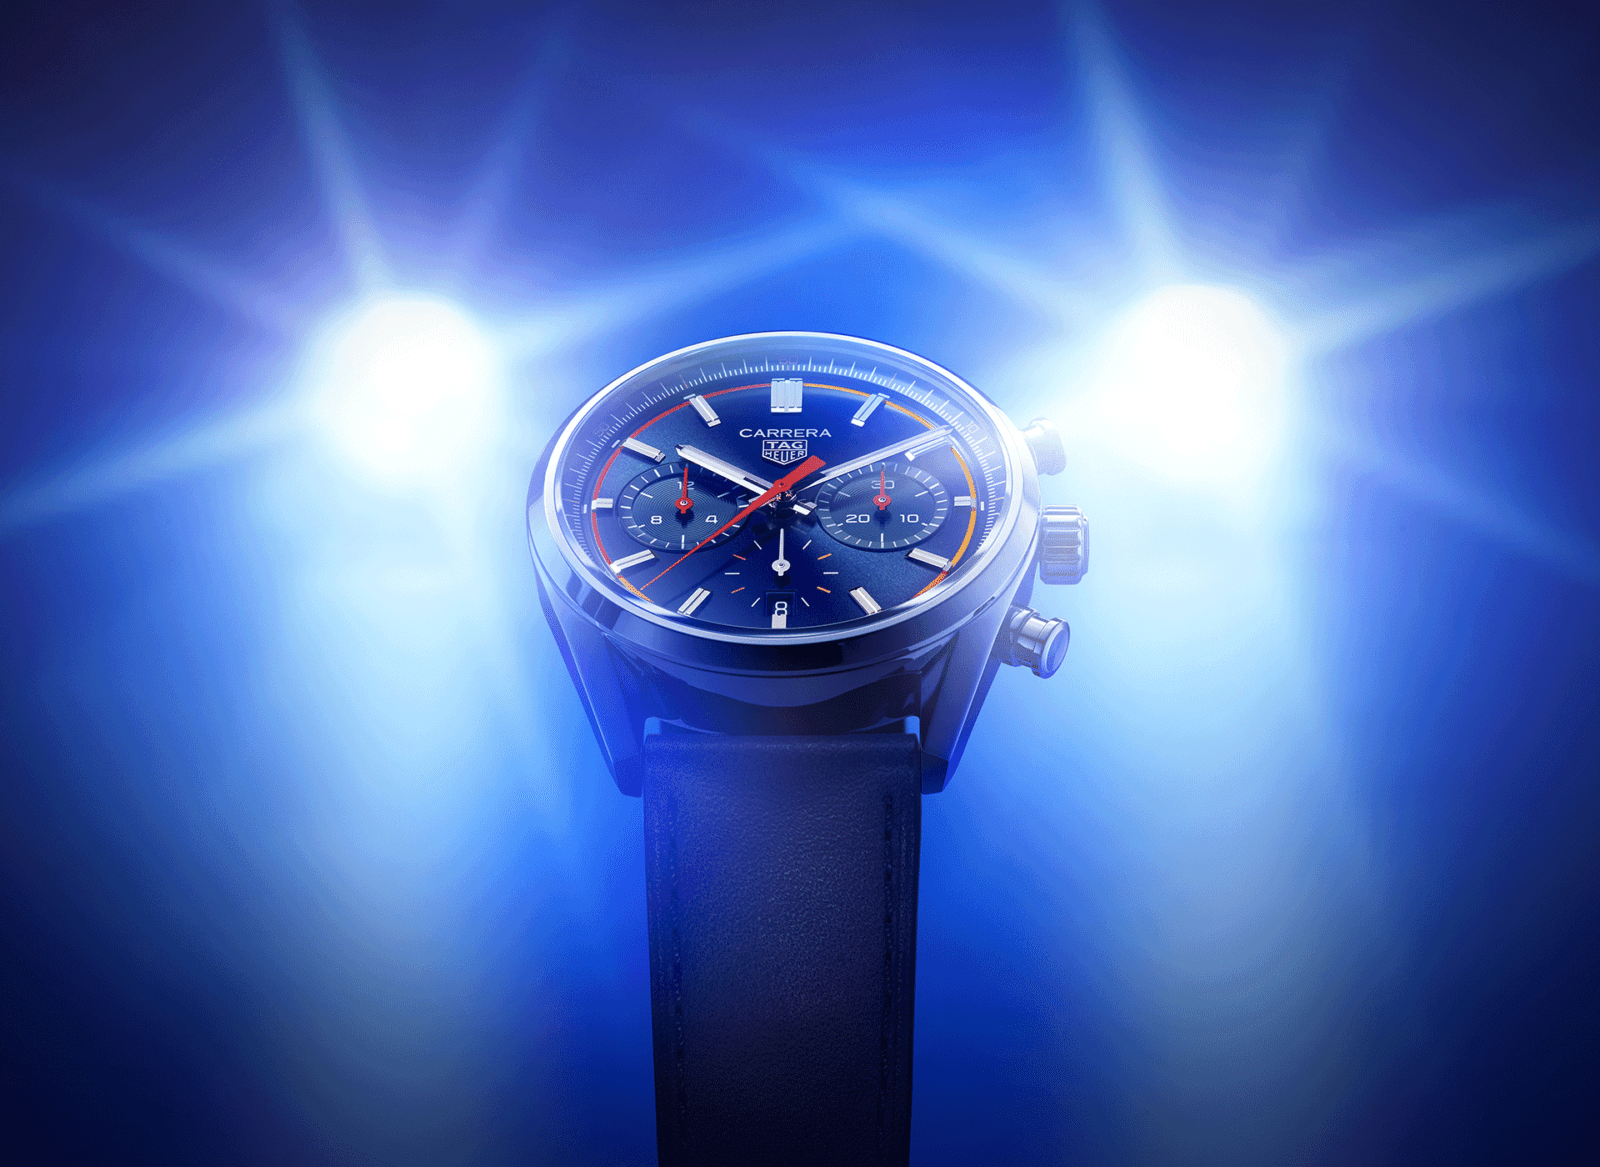 TAG Heuer launches new Carrera chronographs with vintage box sapphire